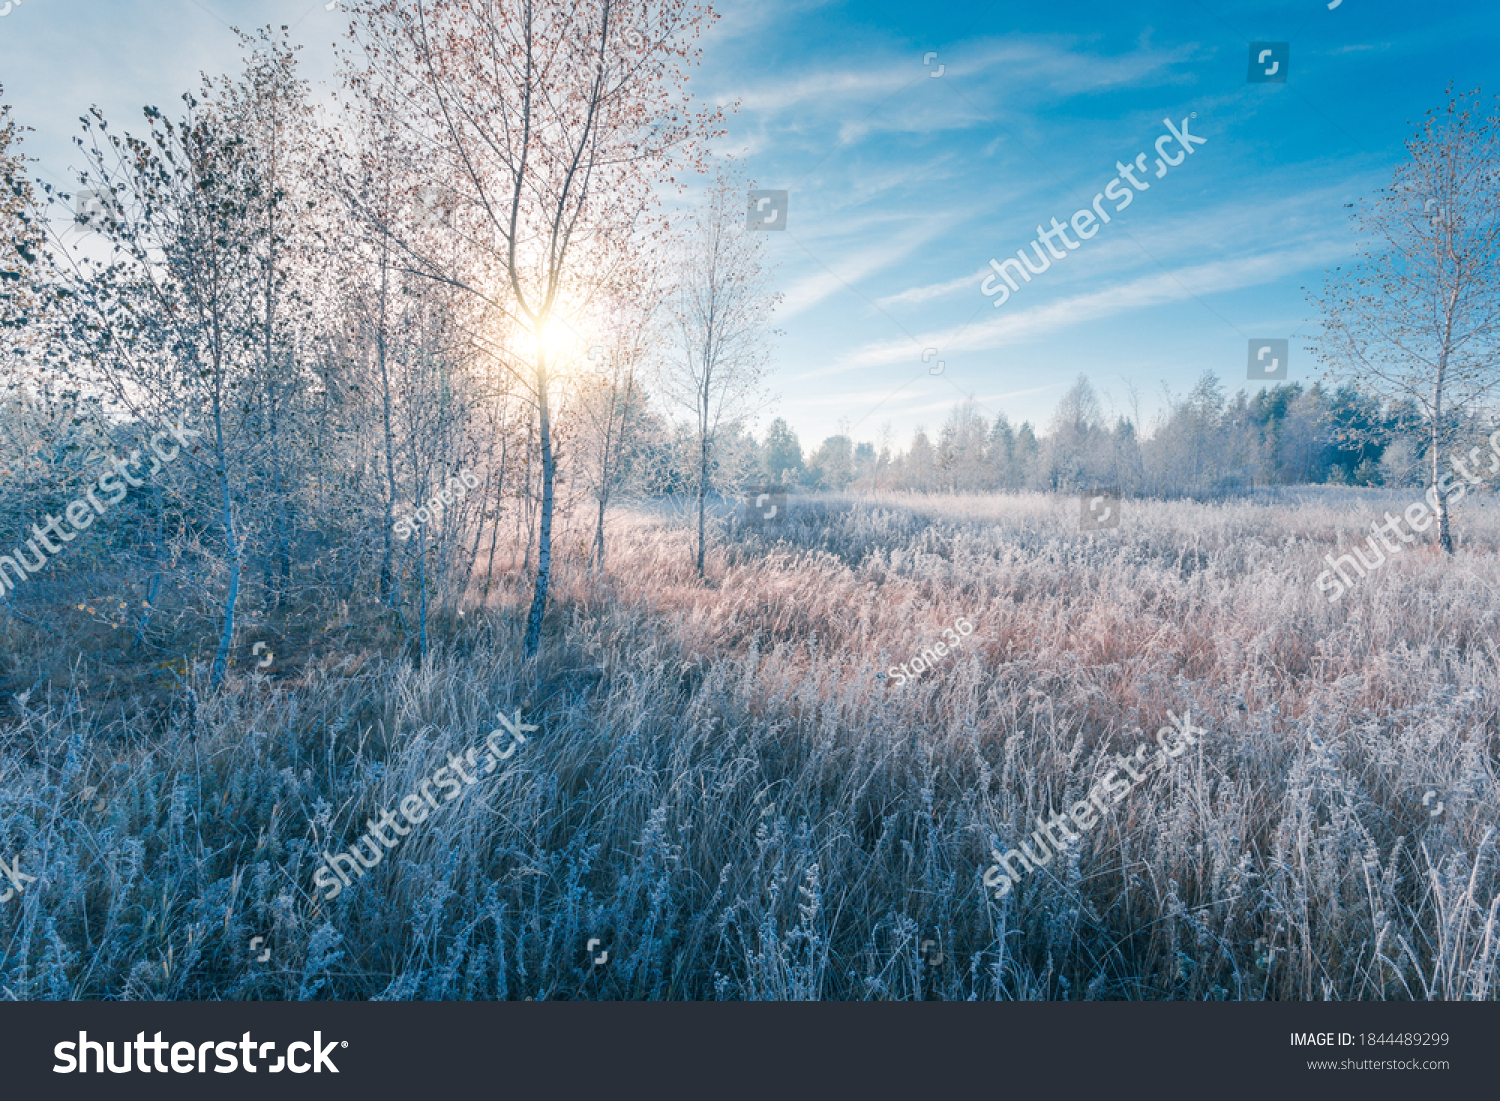 November dreamy frosty morning. Beautiful autumn misty cold sunrise landscape in blue tones. Fog and hoary frost on a scenic high grass copse.